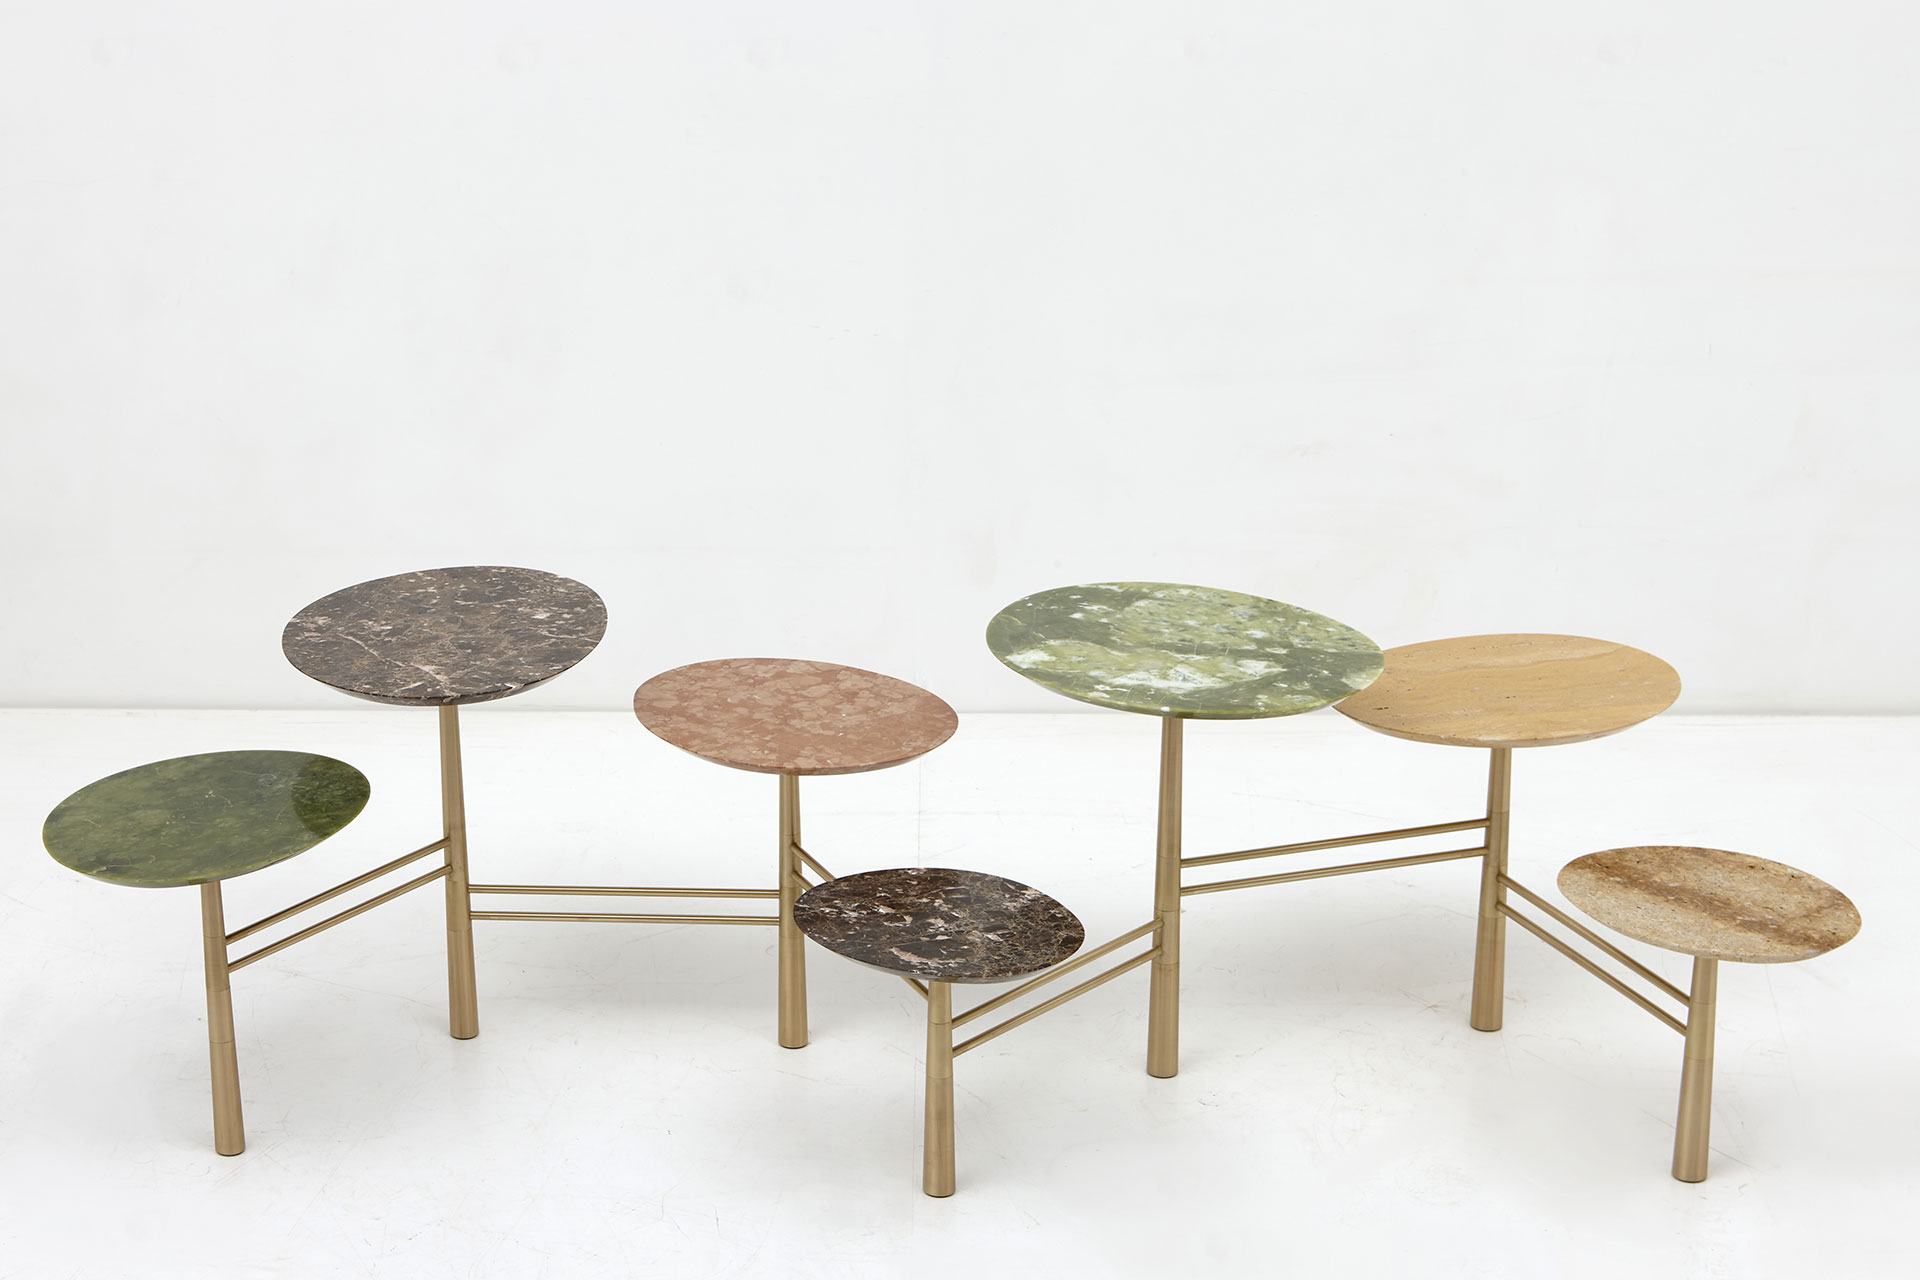 The Pebble table